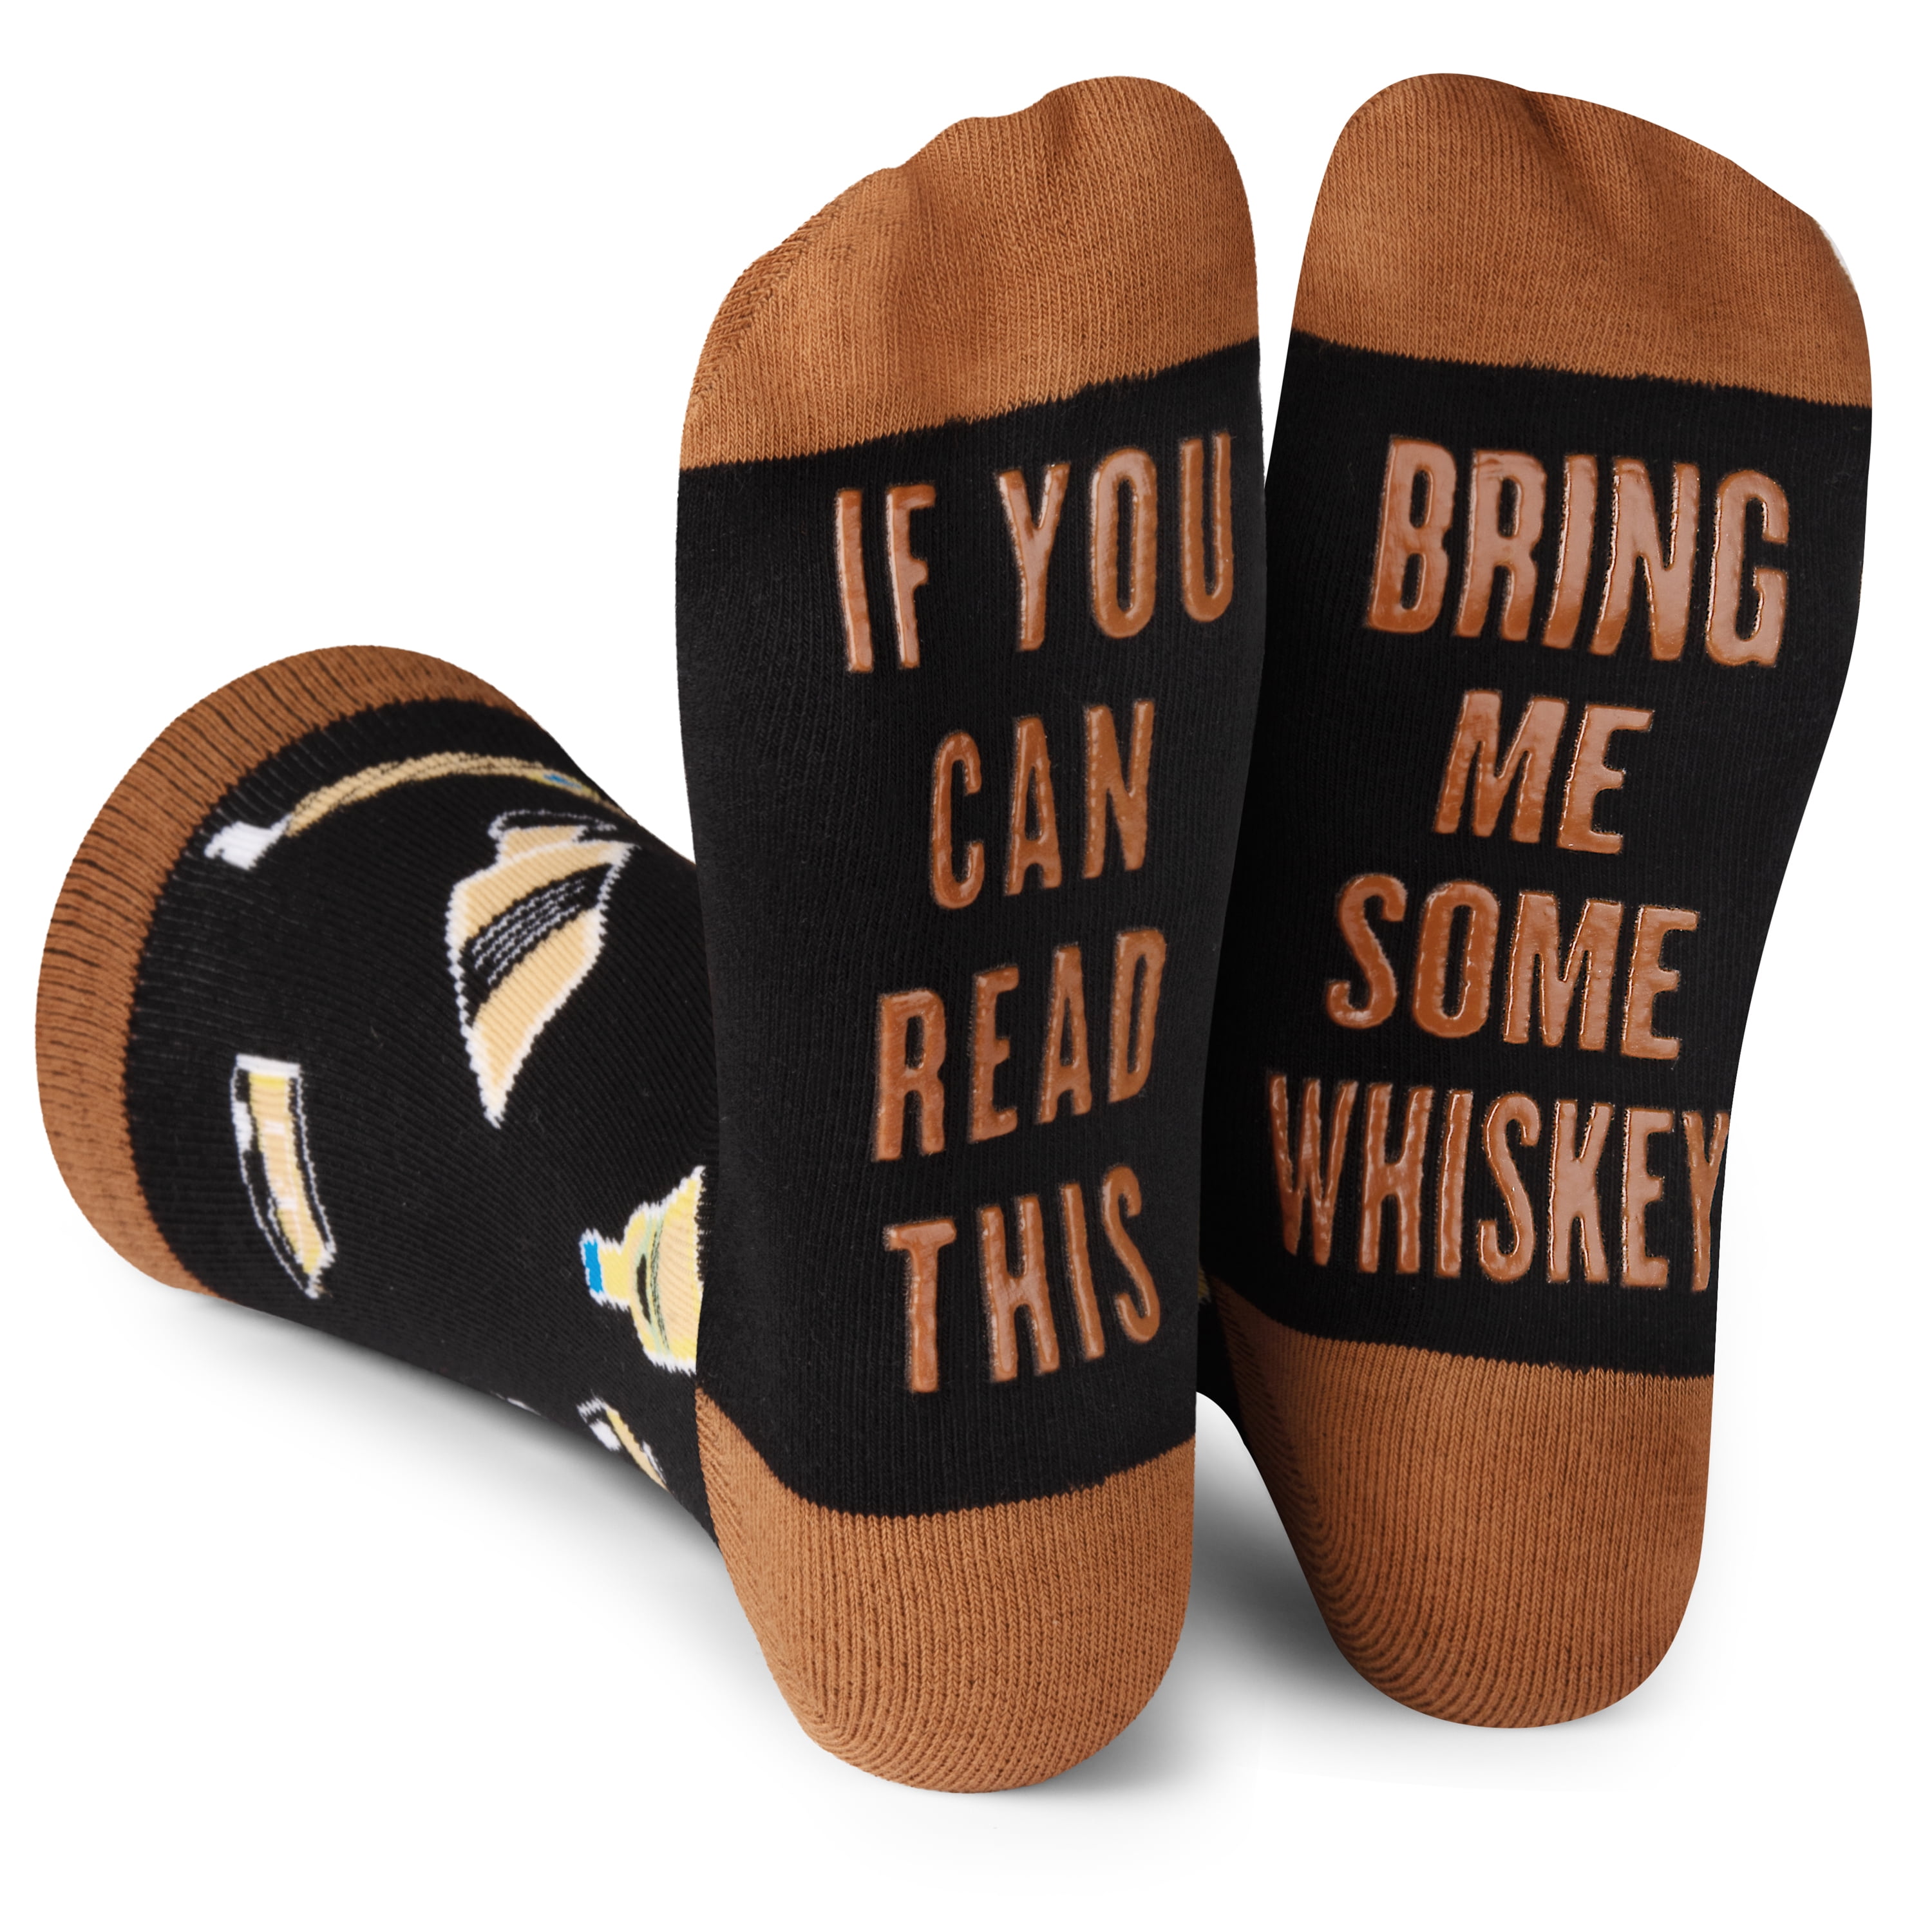 If You Can Read This Bring A Beer Socks Do Not Disturb Unisex Sock Novelty Funny Gift Socks Black-Beer